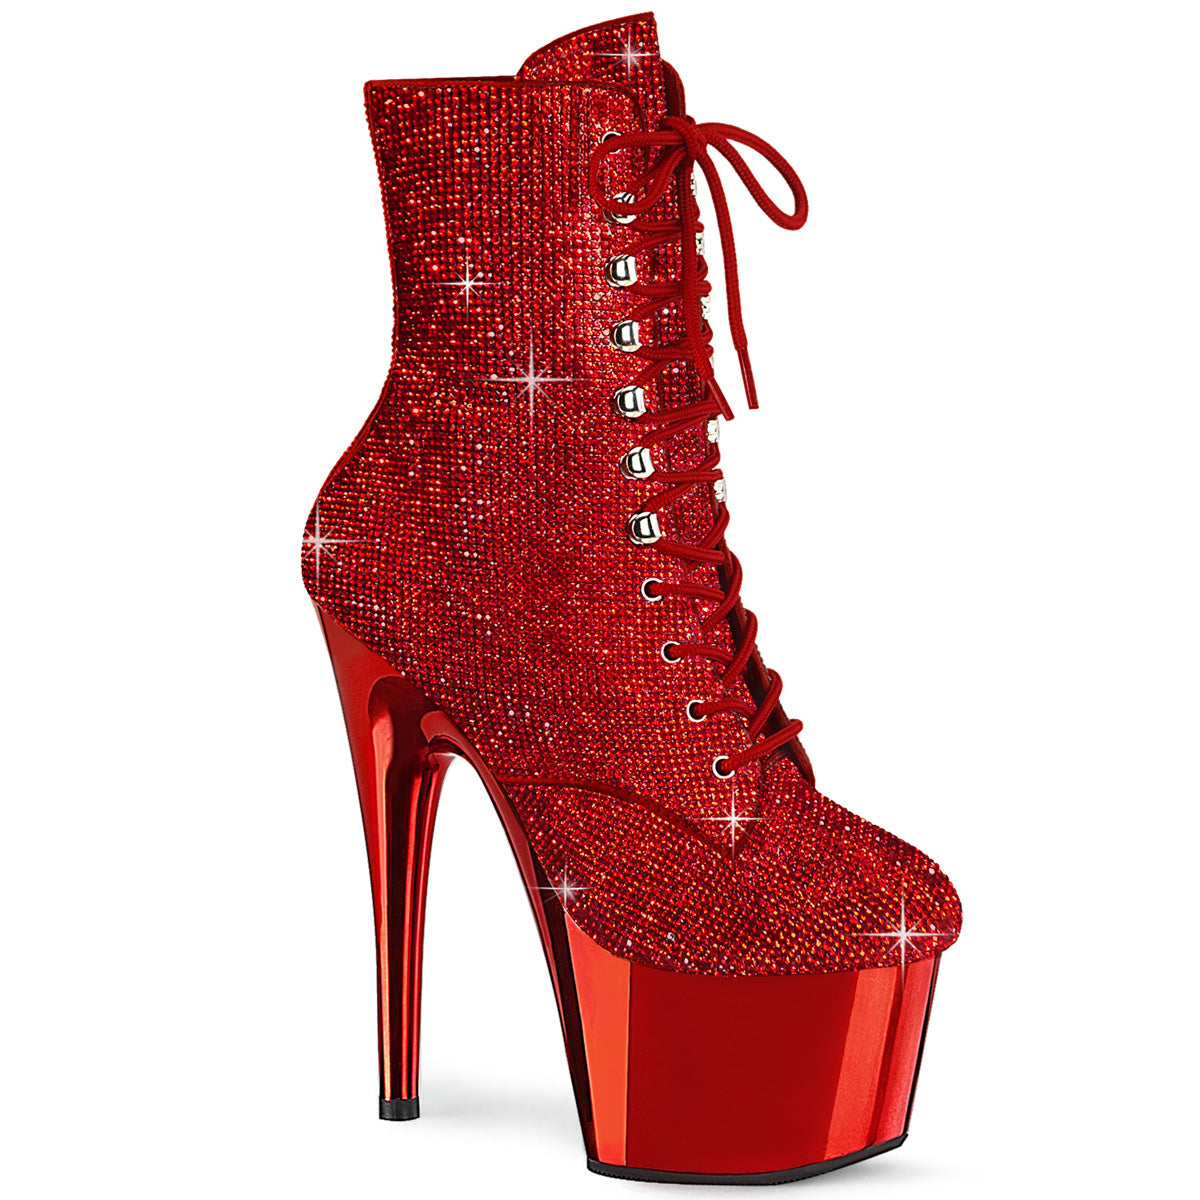 Pleaser ADORE-1020CHRS Red Rhinestone 7 Inch Heel , 2 3/4 Inch Red Chrome Platform Rhinestone Embellished Ankle Boot, Side Zip